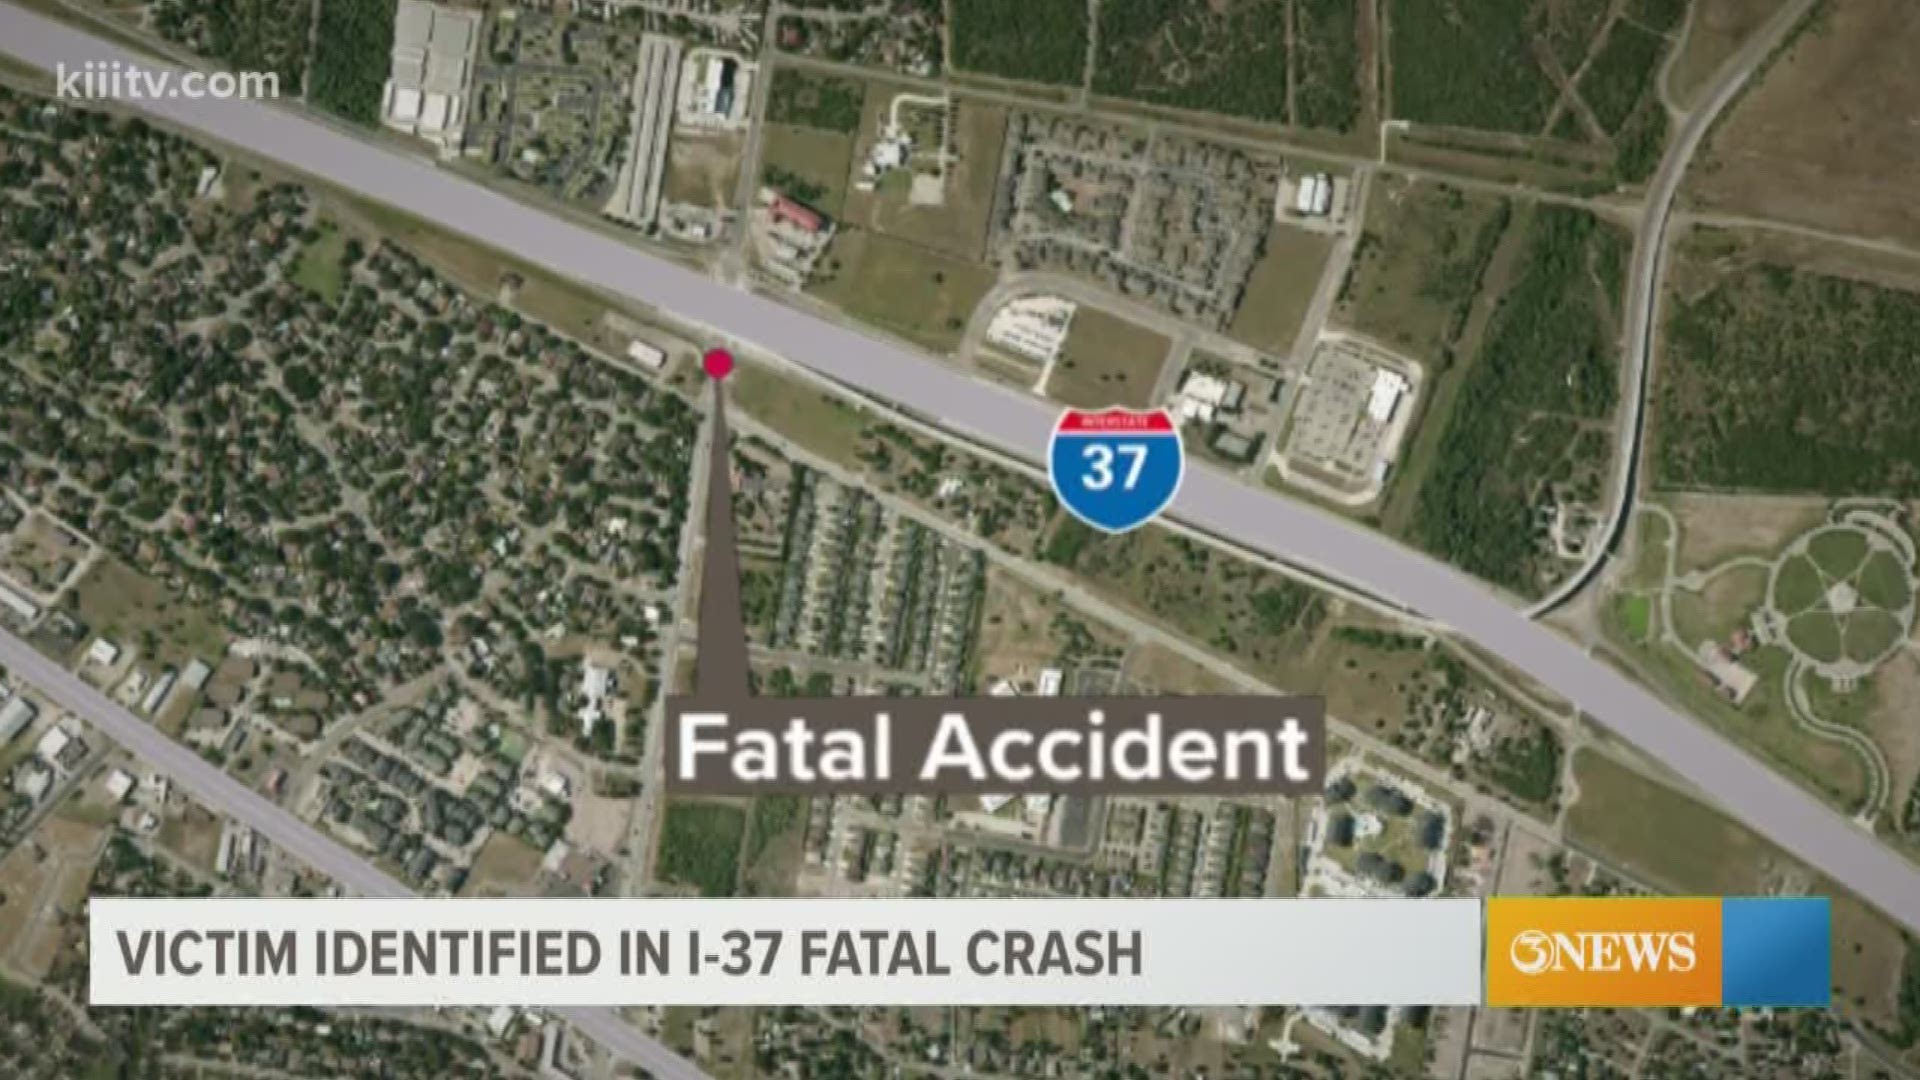 The Nueces County Medical Examiner's Office has identified the 24-year-old woman who was struck and killed Saturday on I-37.